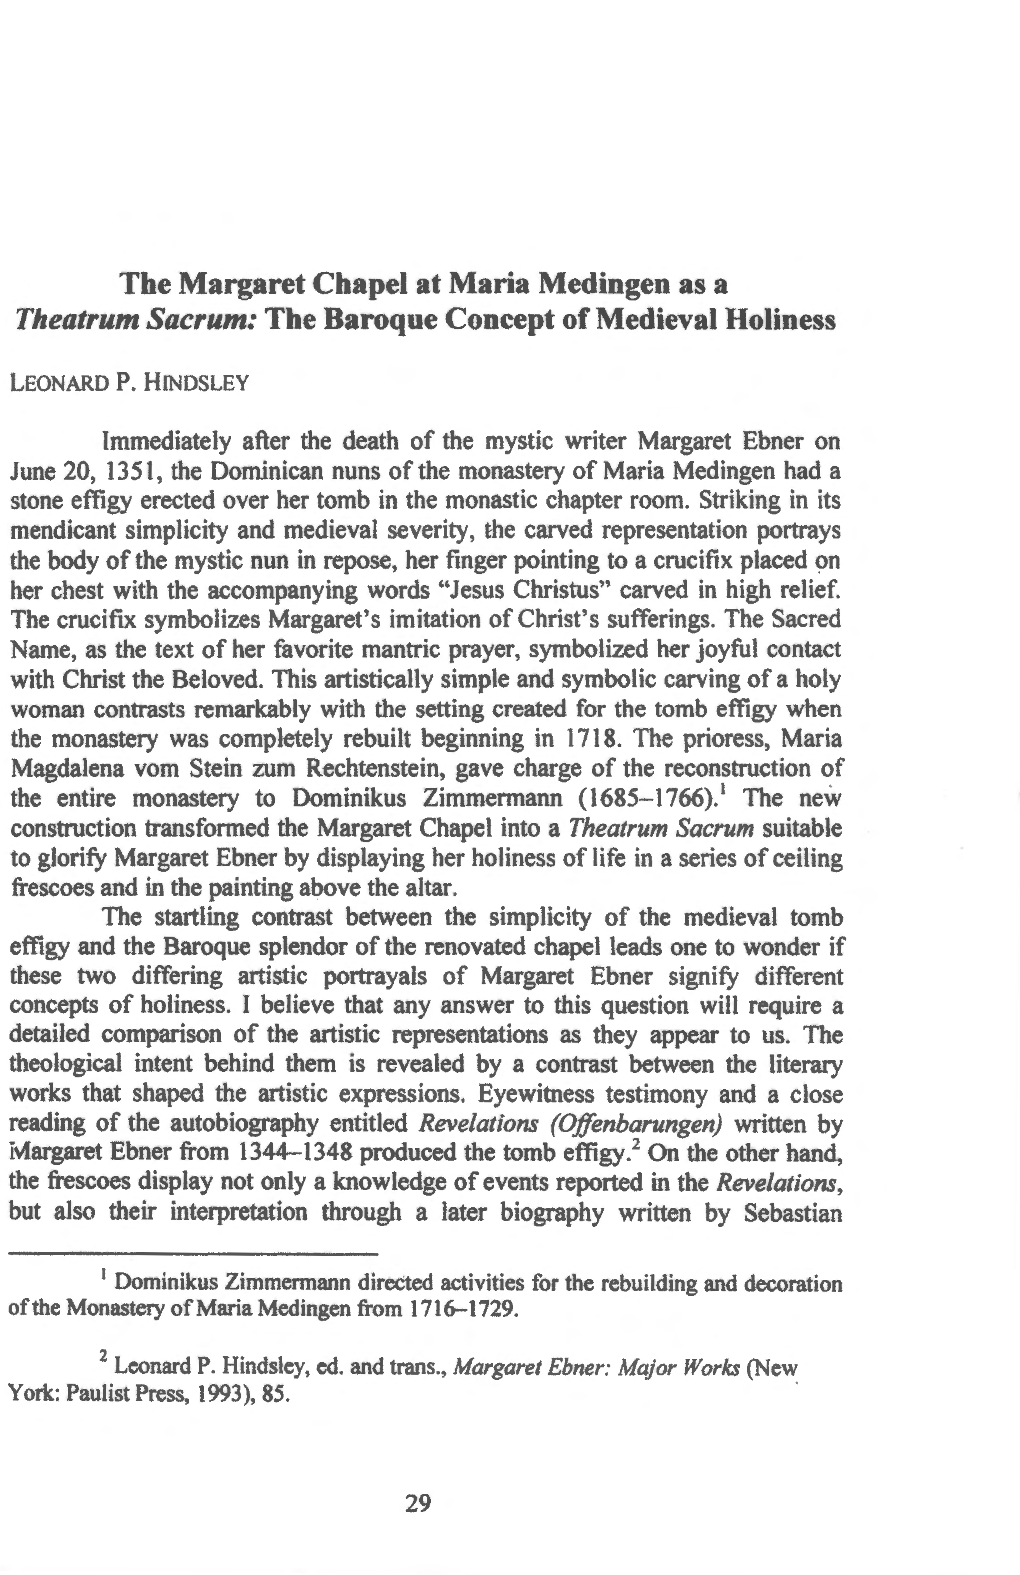 The Margaret Chapel at Maria Medingen As a Theatrum Sacrum: the Baroque Concept of Medieval Holiness